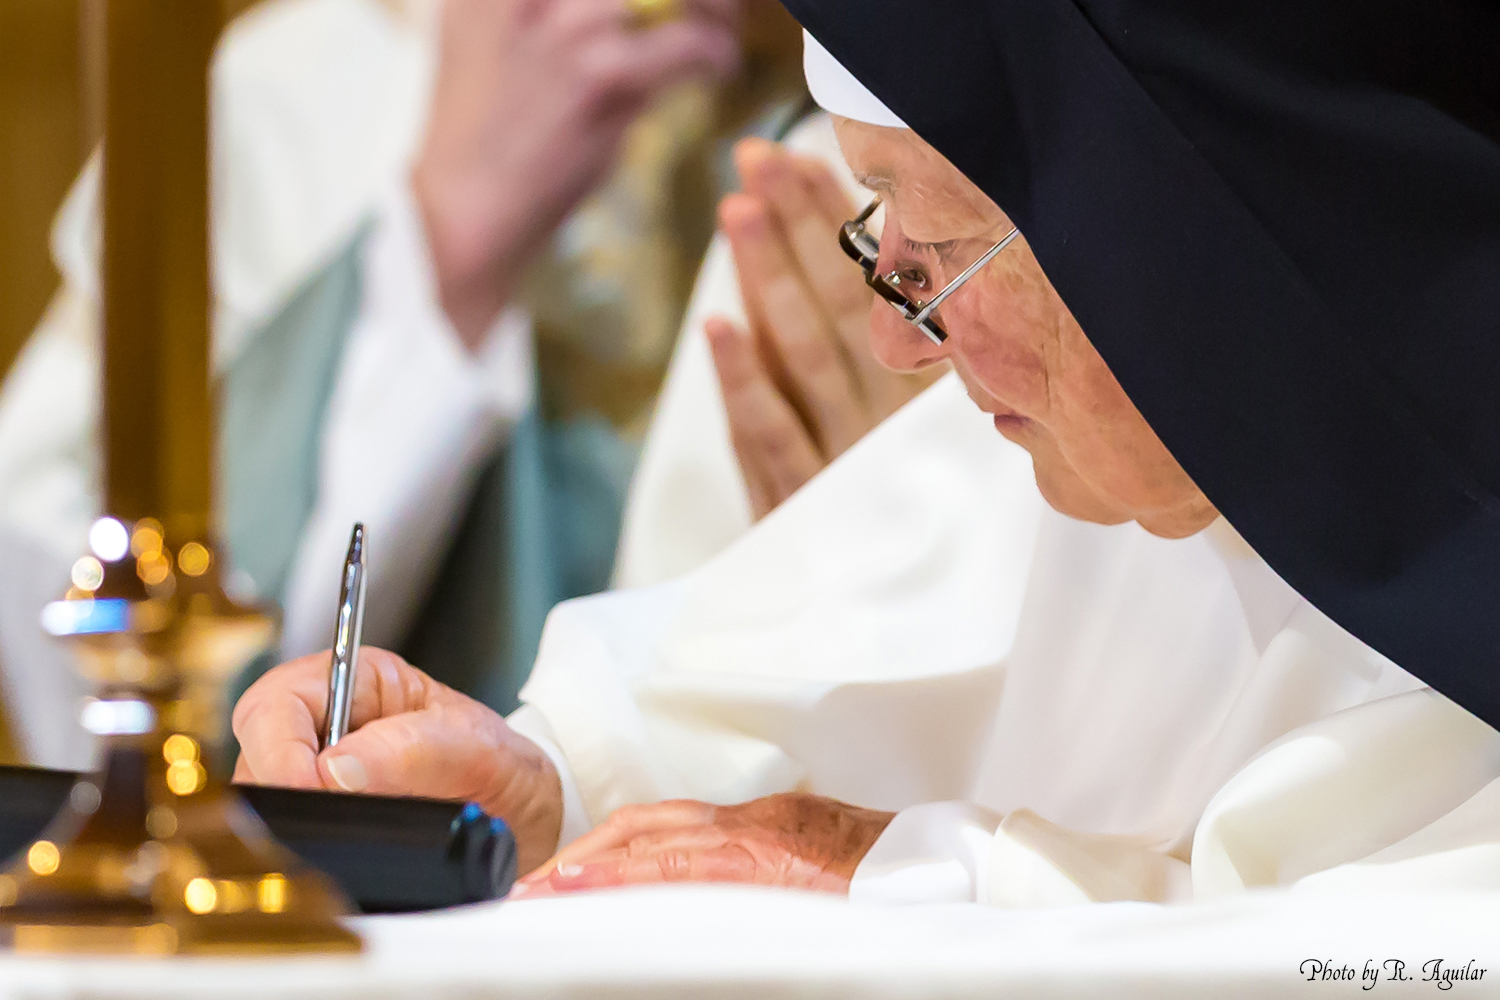 22 Prioress signing the formula of profession